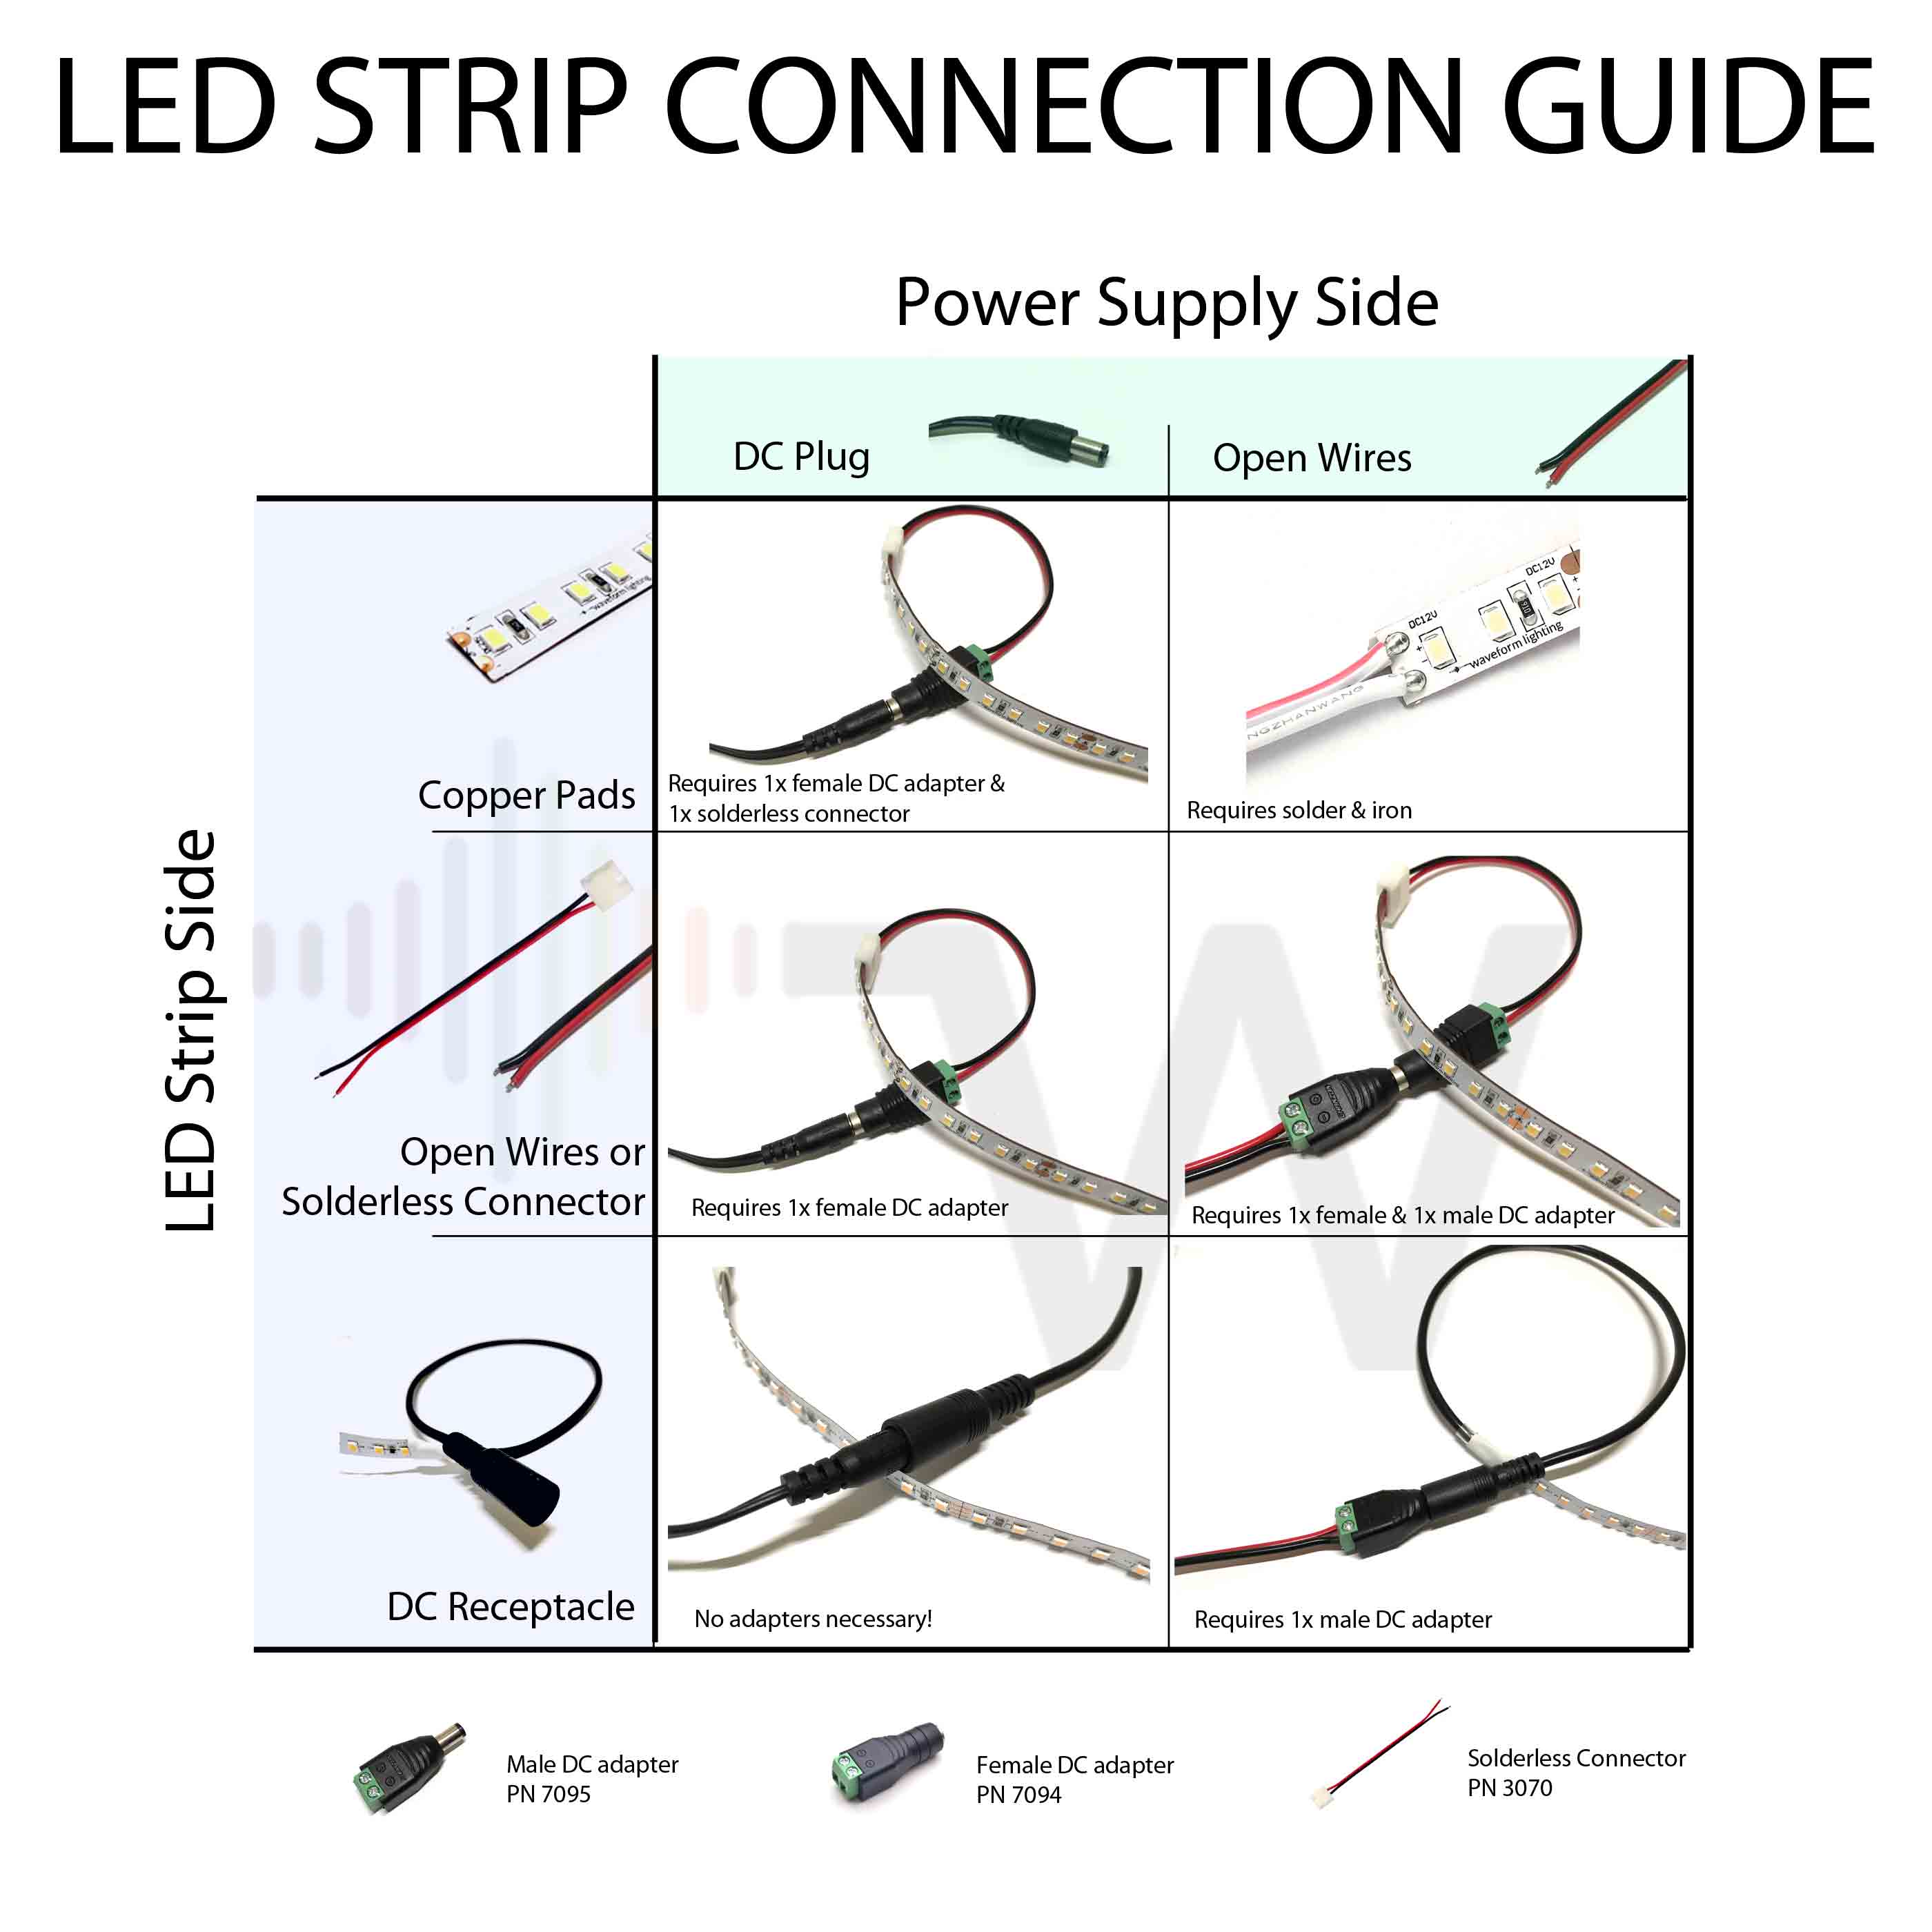 How to Power LED Strip Lights with Batteries